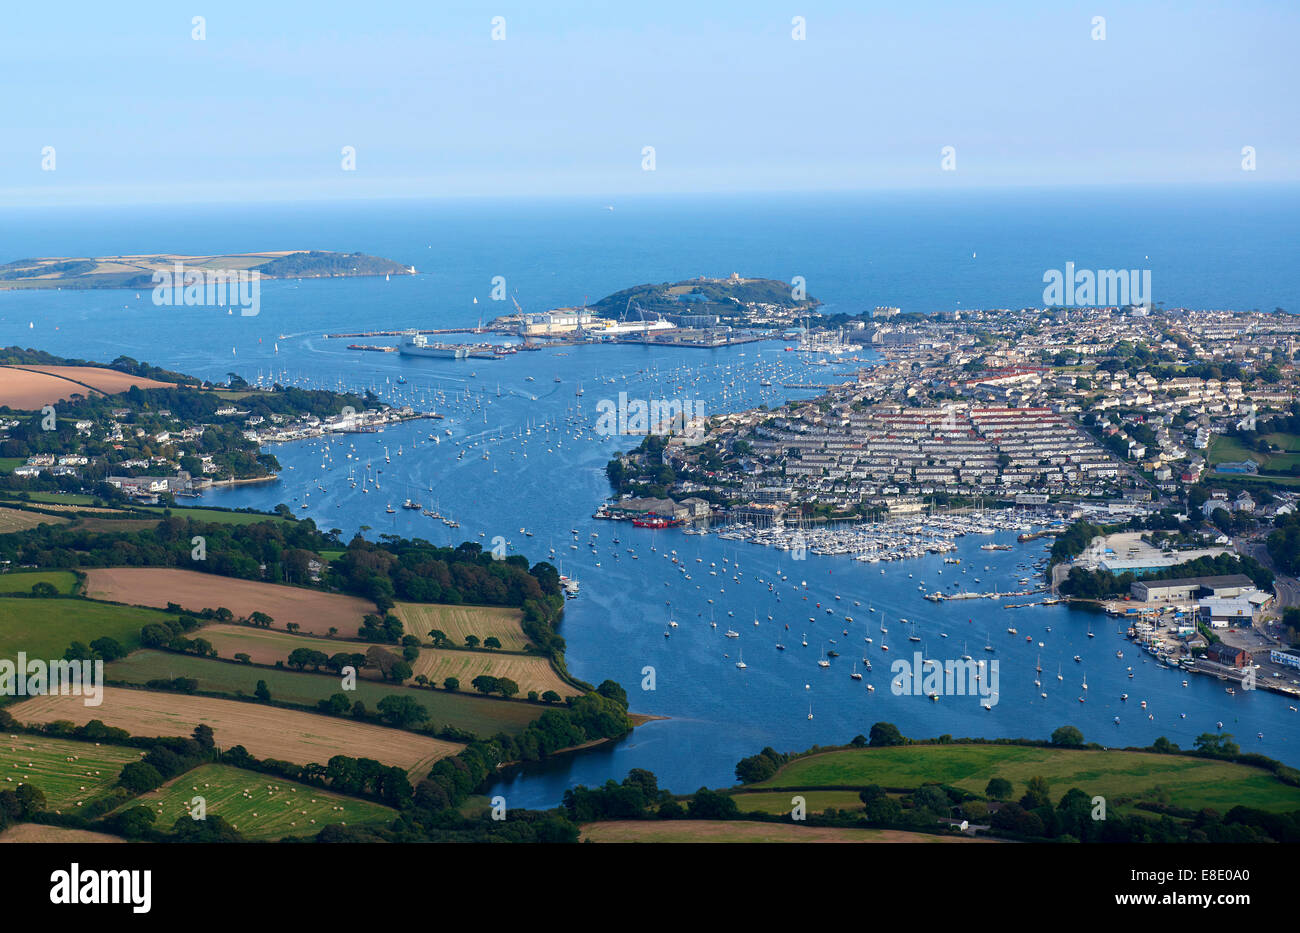 An aerial view of Falmouth and bay, Cornwall, South West England, UK Stock Photo